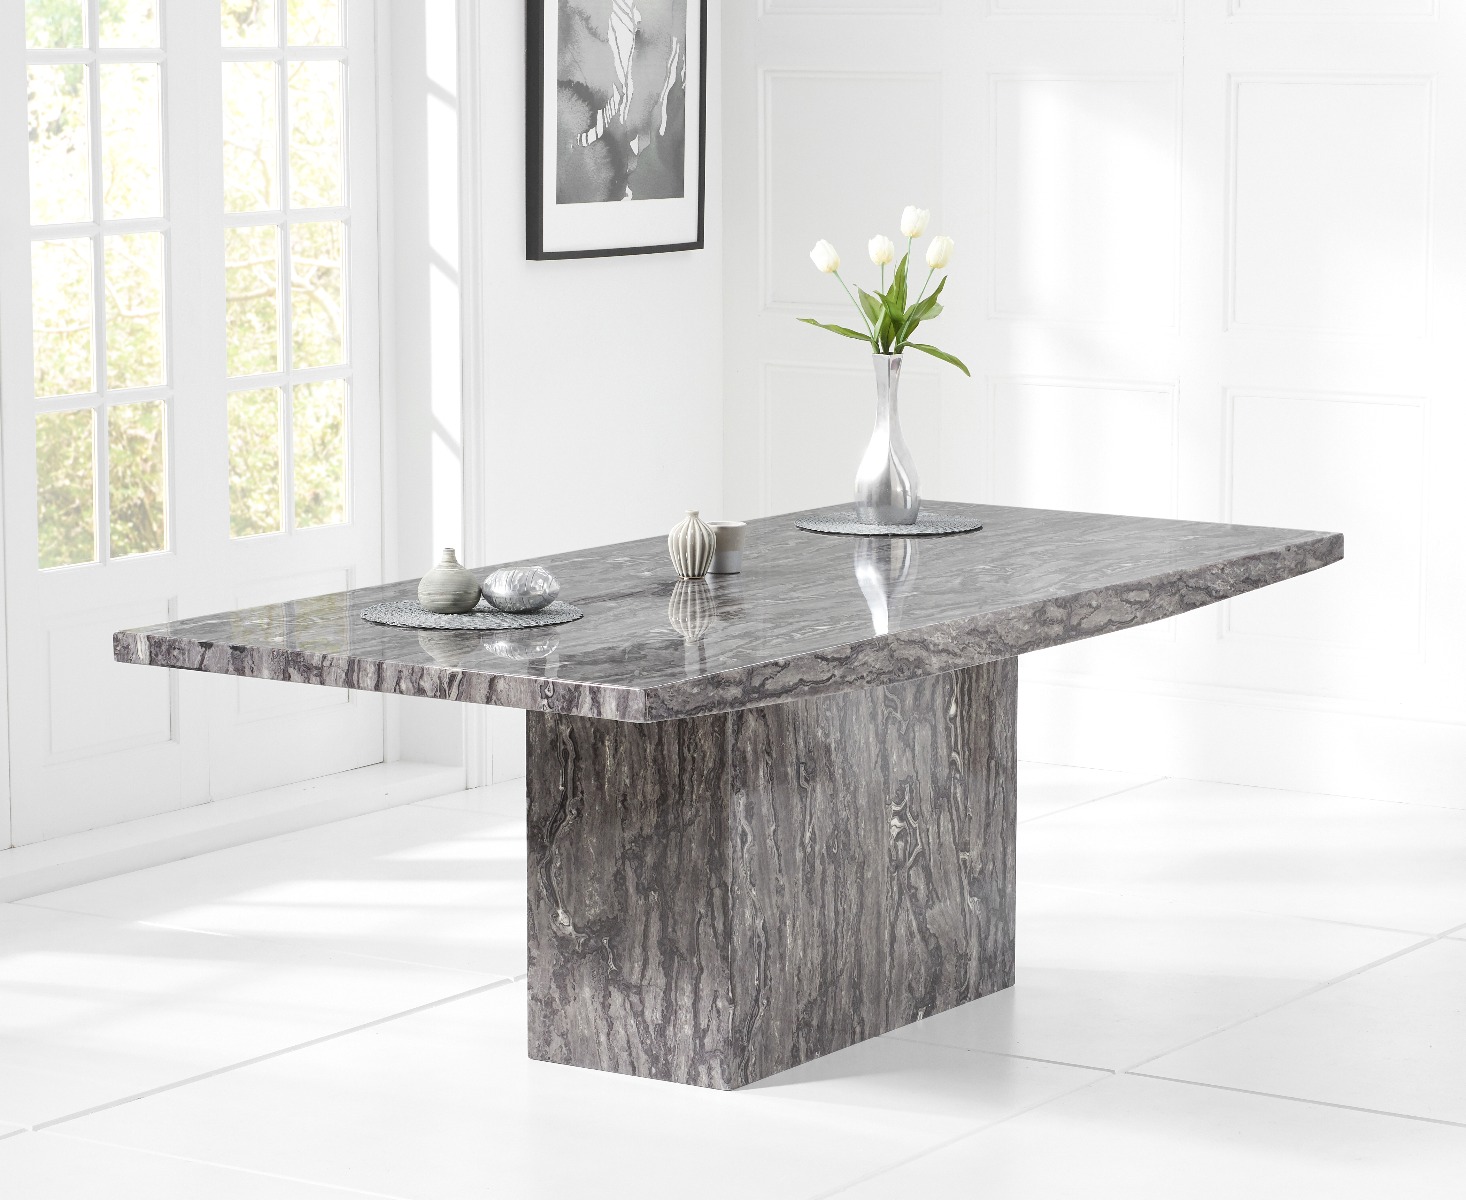 Photo 1 of Crema 220cm grey marble dining table with 6 grey francesca chairs